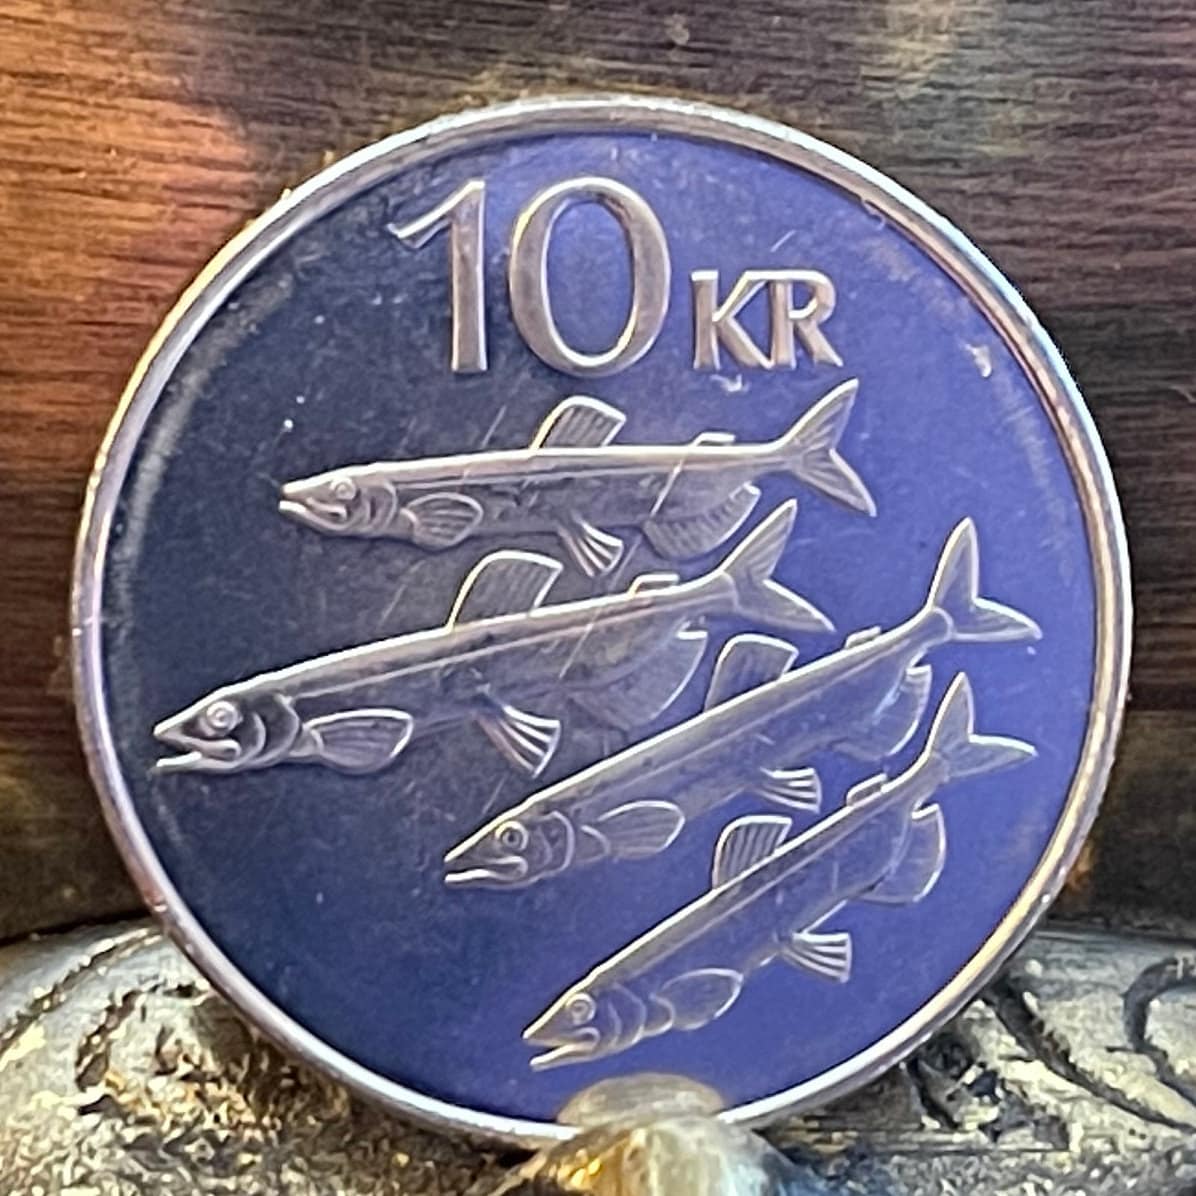 Capelin Fish & Landvaettir 10 Kronur Iceland Authentic Coin Money for Jewelry and Craft Making (Smelt)